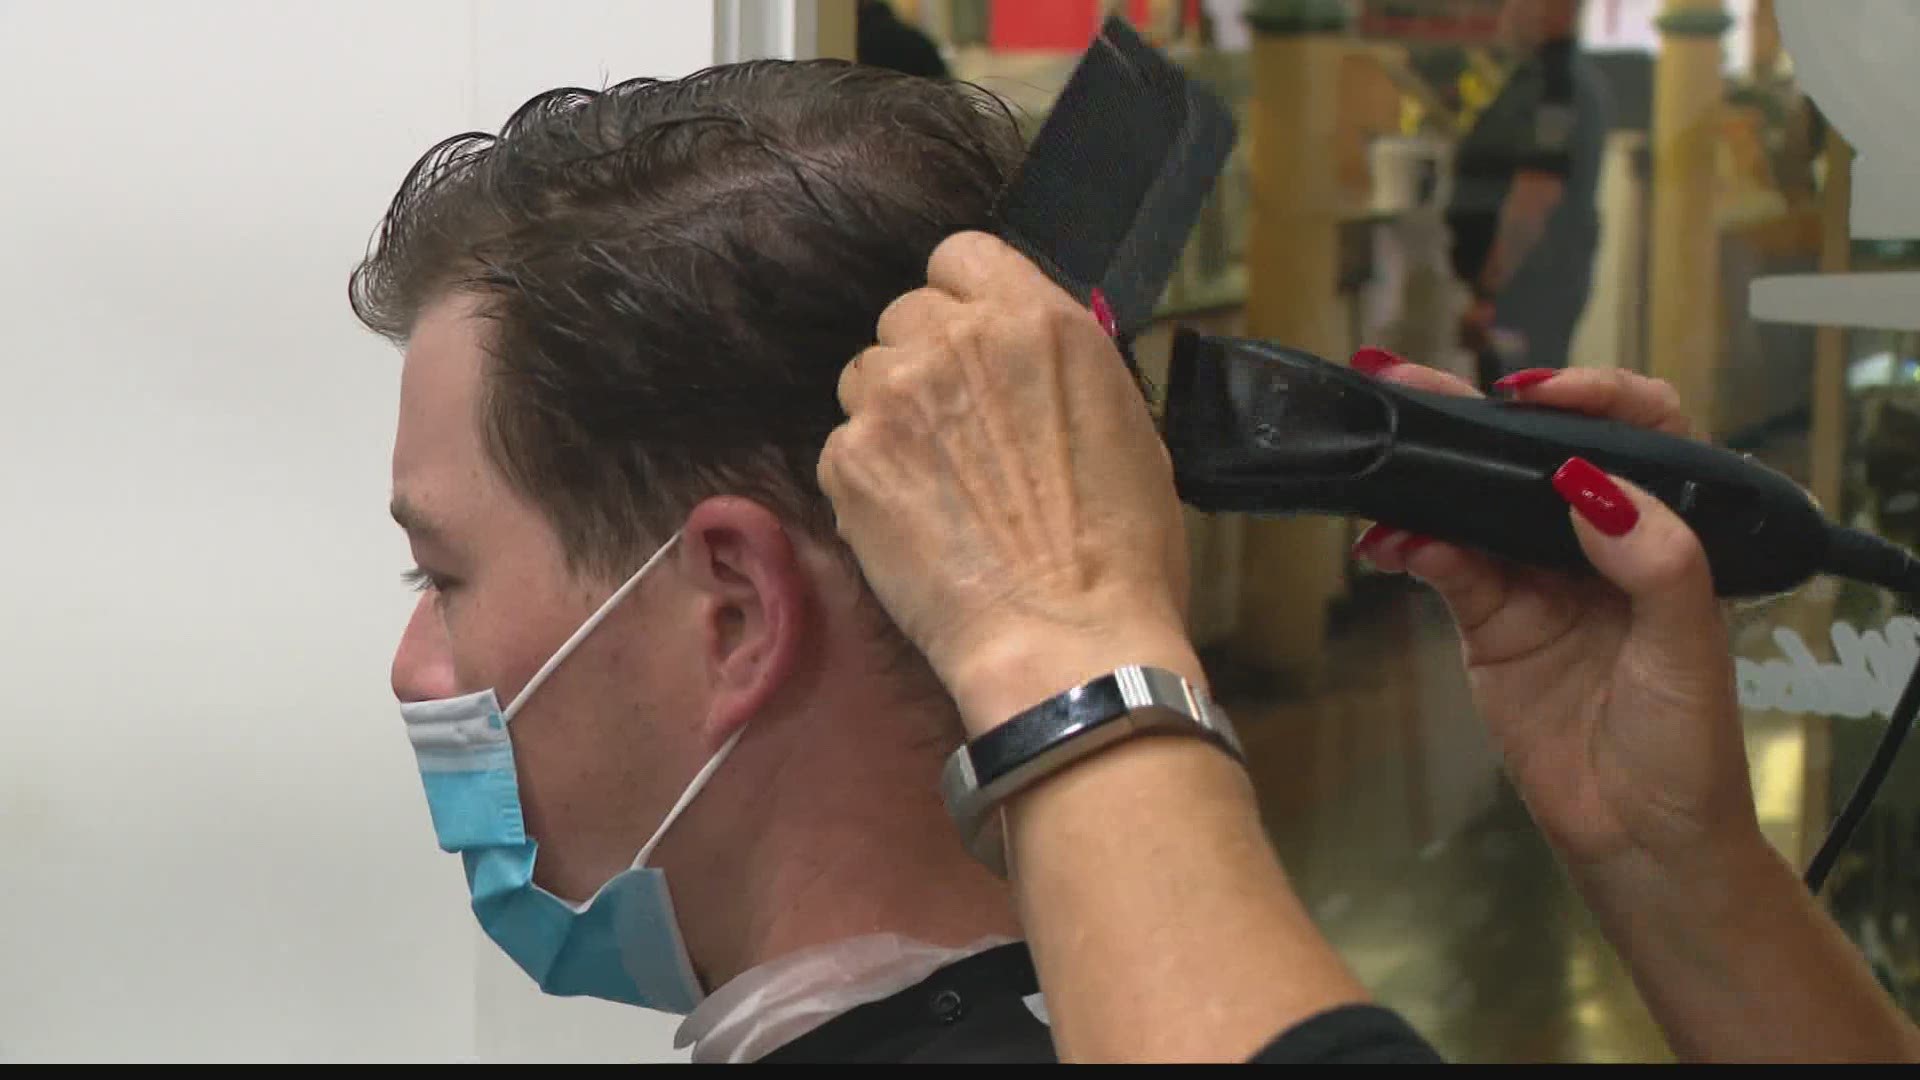 An Indianapolis barber is headed to court after being cited for not wearing a mask.